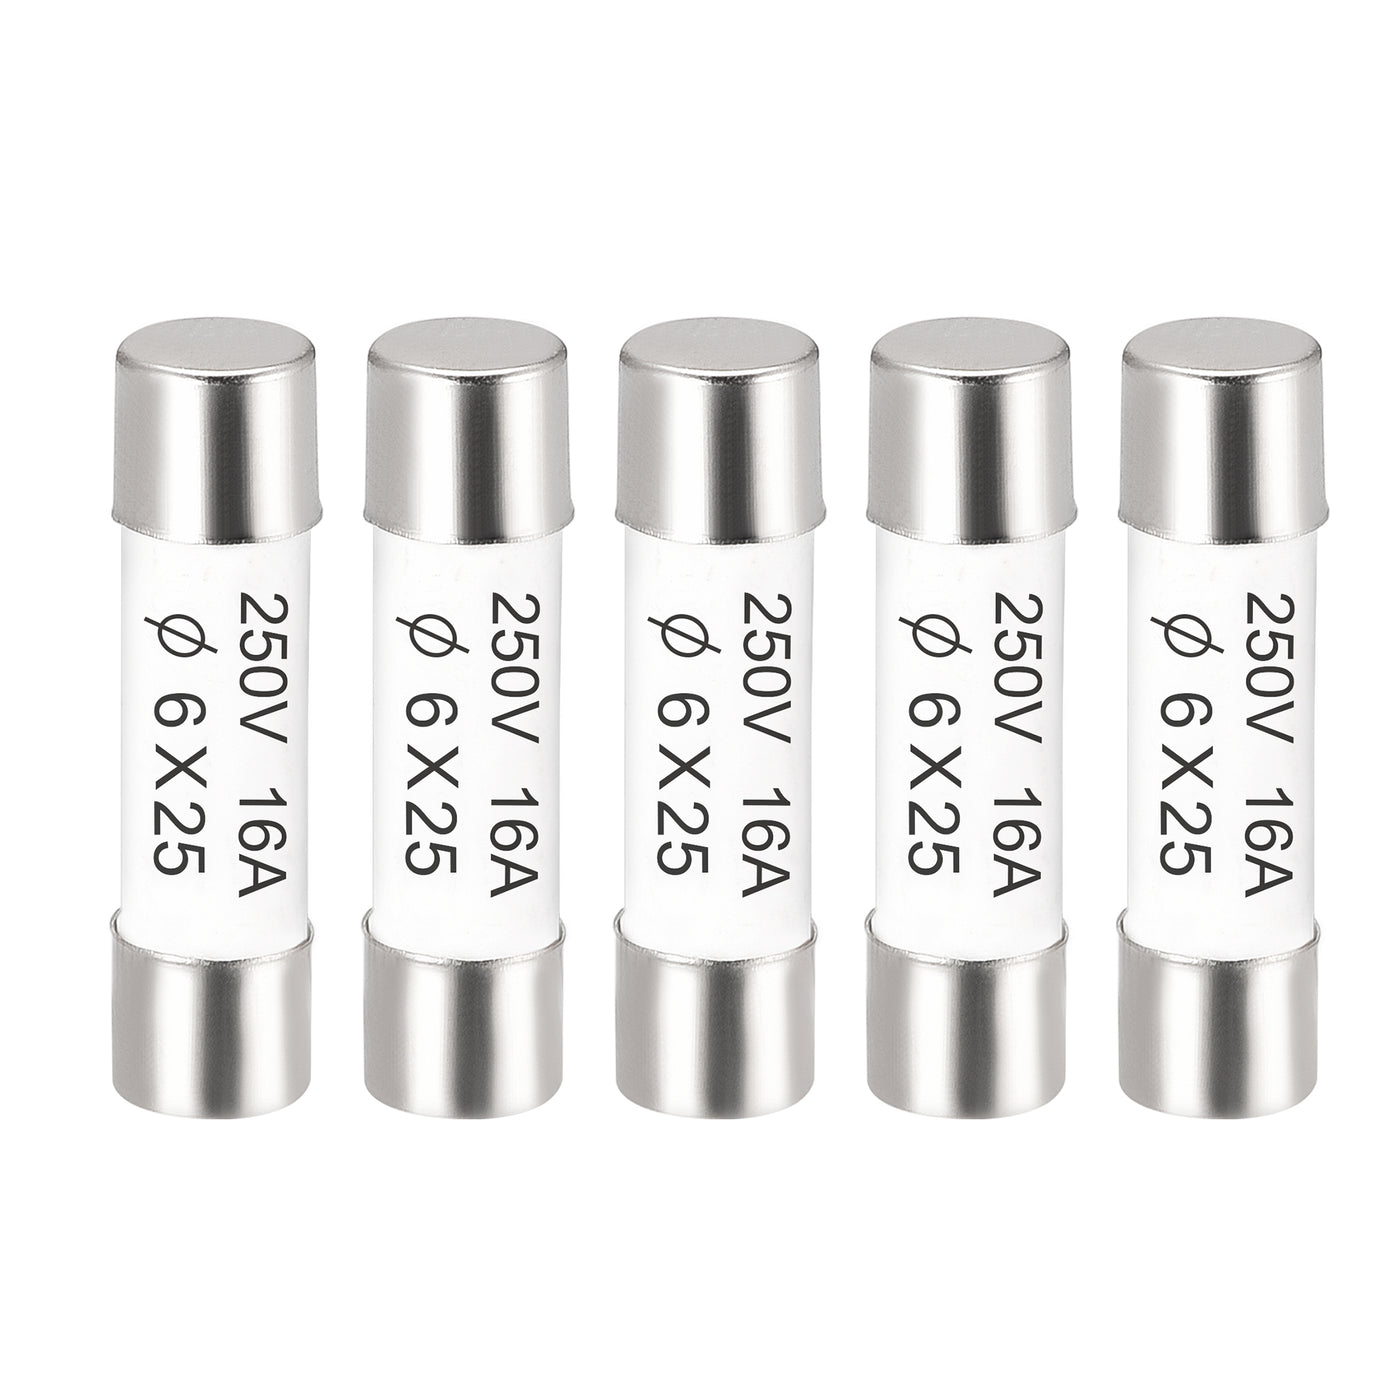 uxcell Uxcell Ceramic Cartridge Fuses 16A 250V 6x25mm Fast Blow for Energy Saving Lamp 5pcs